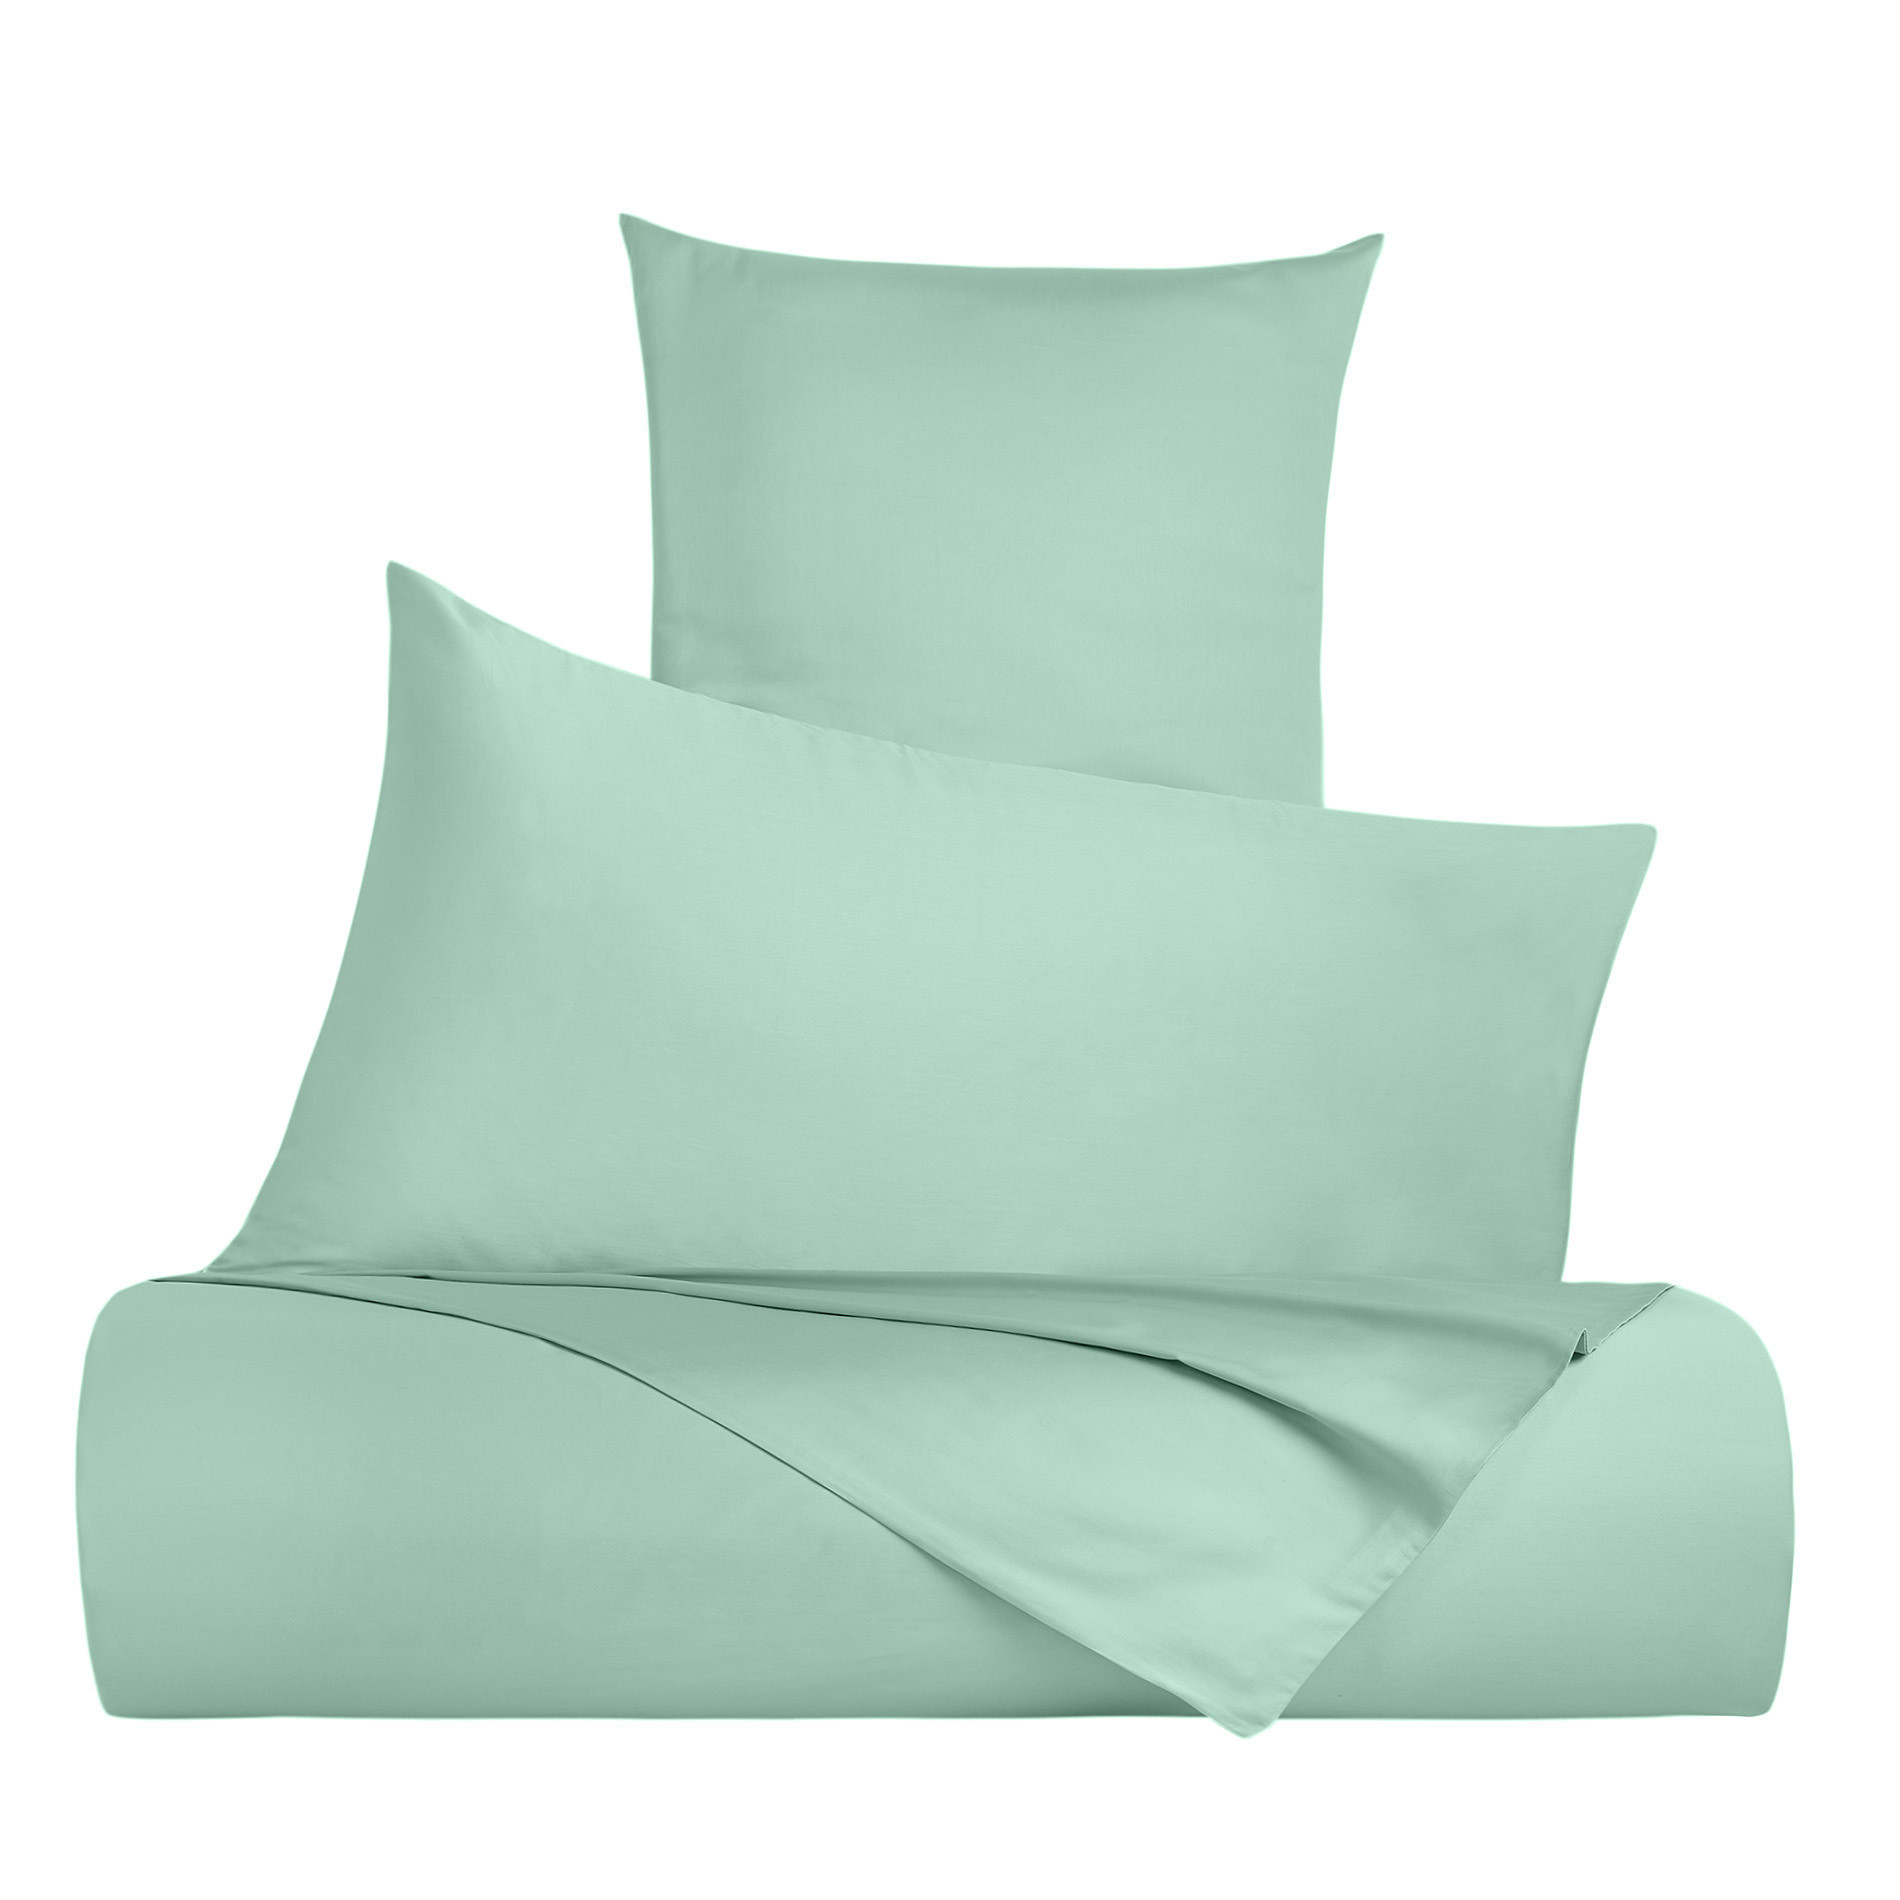 Zefiro bed linen set in 100% cotton satin, , large image number 0